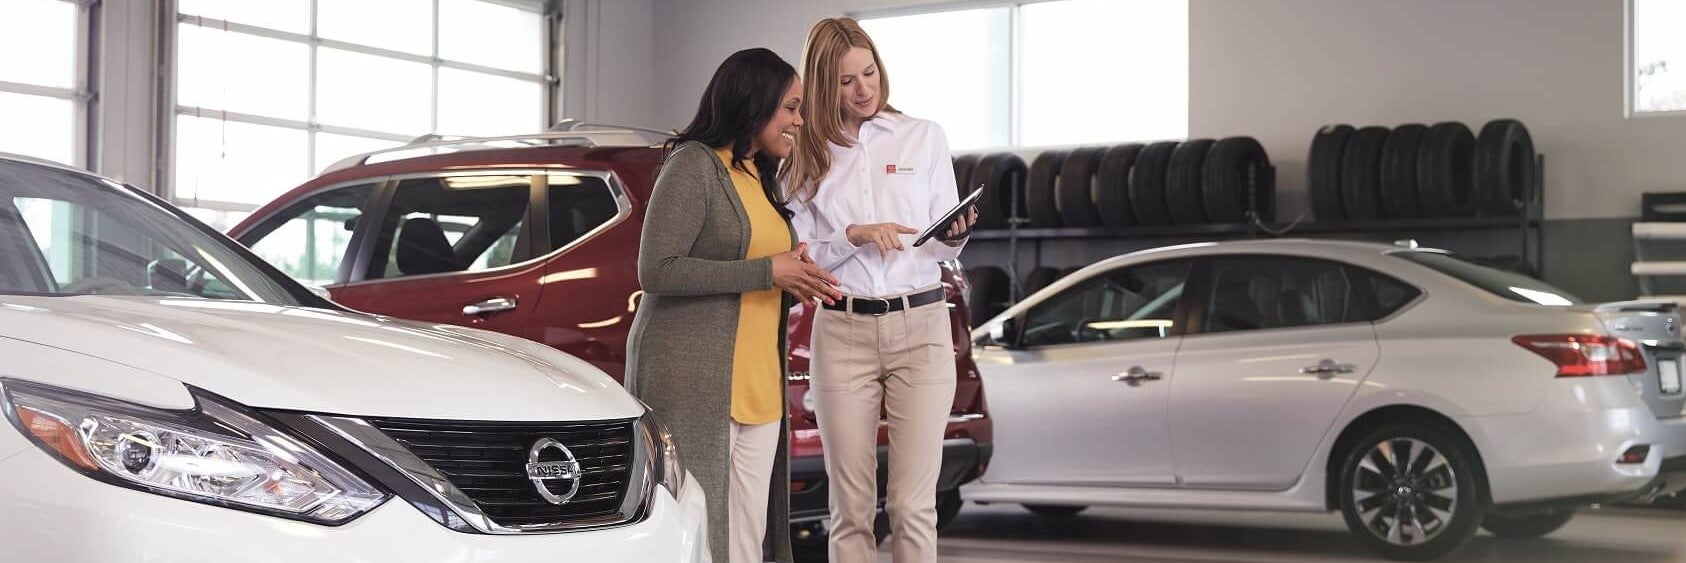 Used Nissan Service Indianapolis IN